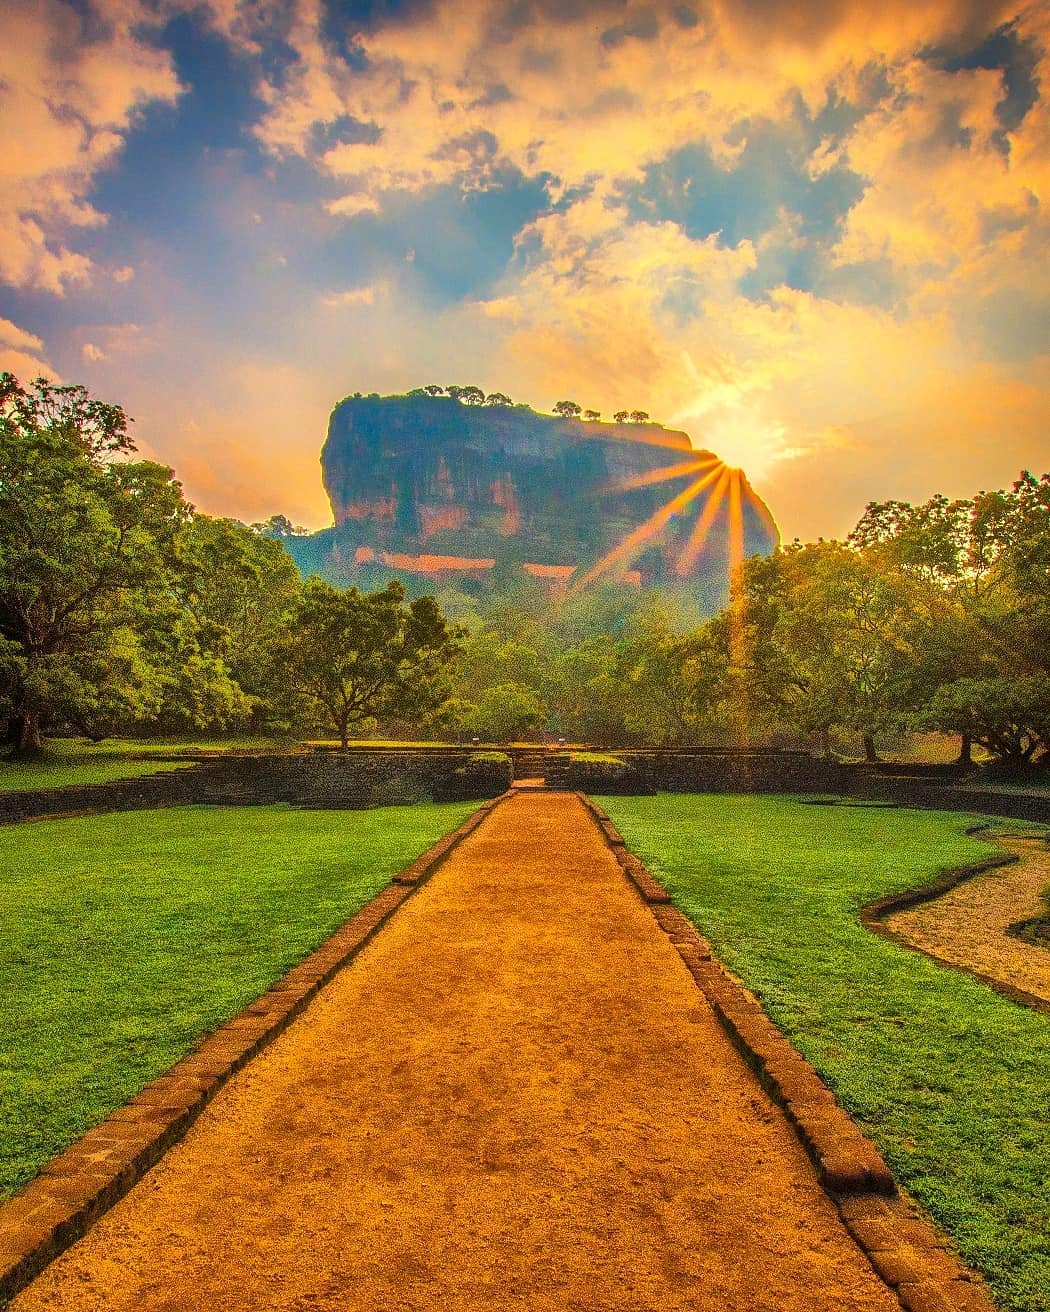 The morning sun takes its first peek around Sigiriya Lion Rock Fortress in the central plains of Sri Lanka – no.1 on @lonelyplanet's #BestinTravel list of top countries to visit in 2019.⠀⠀
⠀⠀
One of the most dramatic sights in @destination_srilanka, the ruins of the iconic fortress, sit atop near-vertical walls that rise almost 200m (660ft) above the surrounding forests. The site was selected by King Kasyapa (477–495) to be his capital city. He built his palace on the top, carved from bedrock and decorated its sides with colourful frescoes. ⠀⠀
-⠀
-⠀
-⠀
-⠀
-⠀
-⠀⠀
#SoSriLanka #VisitSriLanka #Sigiriya #SigiriyaRock #sigiriyarockfortress #LionRock #srilanka  #srilankadaily #srilankatravel #lka #Lanka #ceylon #IndianOcean #ocean #srilankaecotourism #nakedplanet #wonderful_places #exploretocreate #liveoutdoors #neverstopexploring #keepitwild #thegreatoutdoors #lppathfinders @srilanka #srilankanheritage